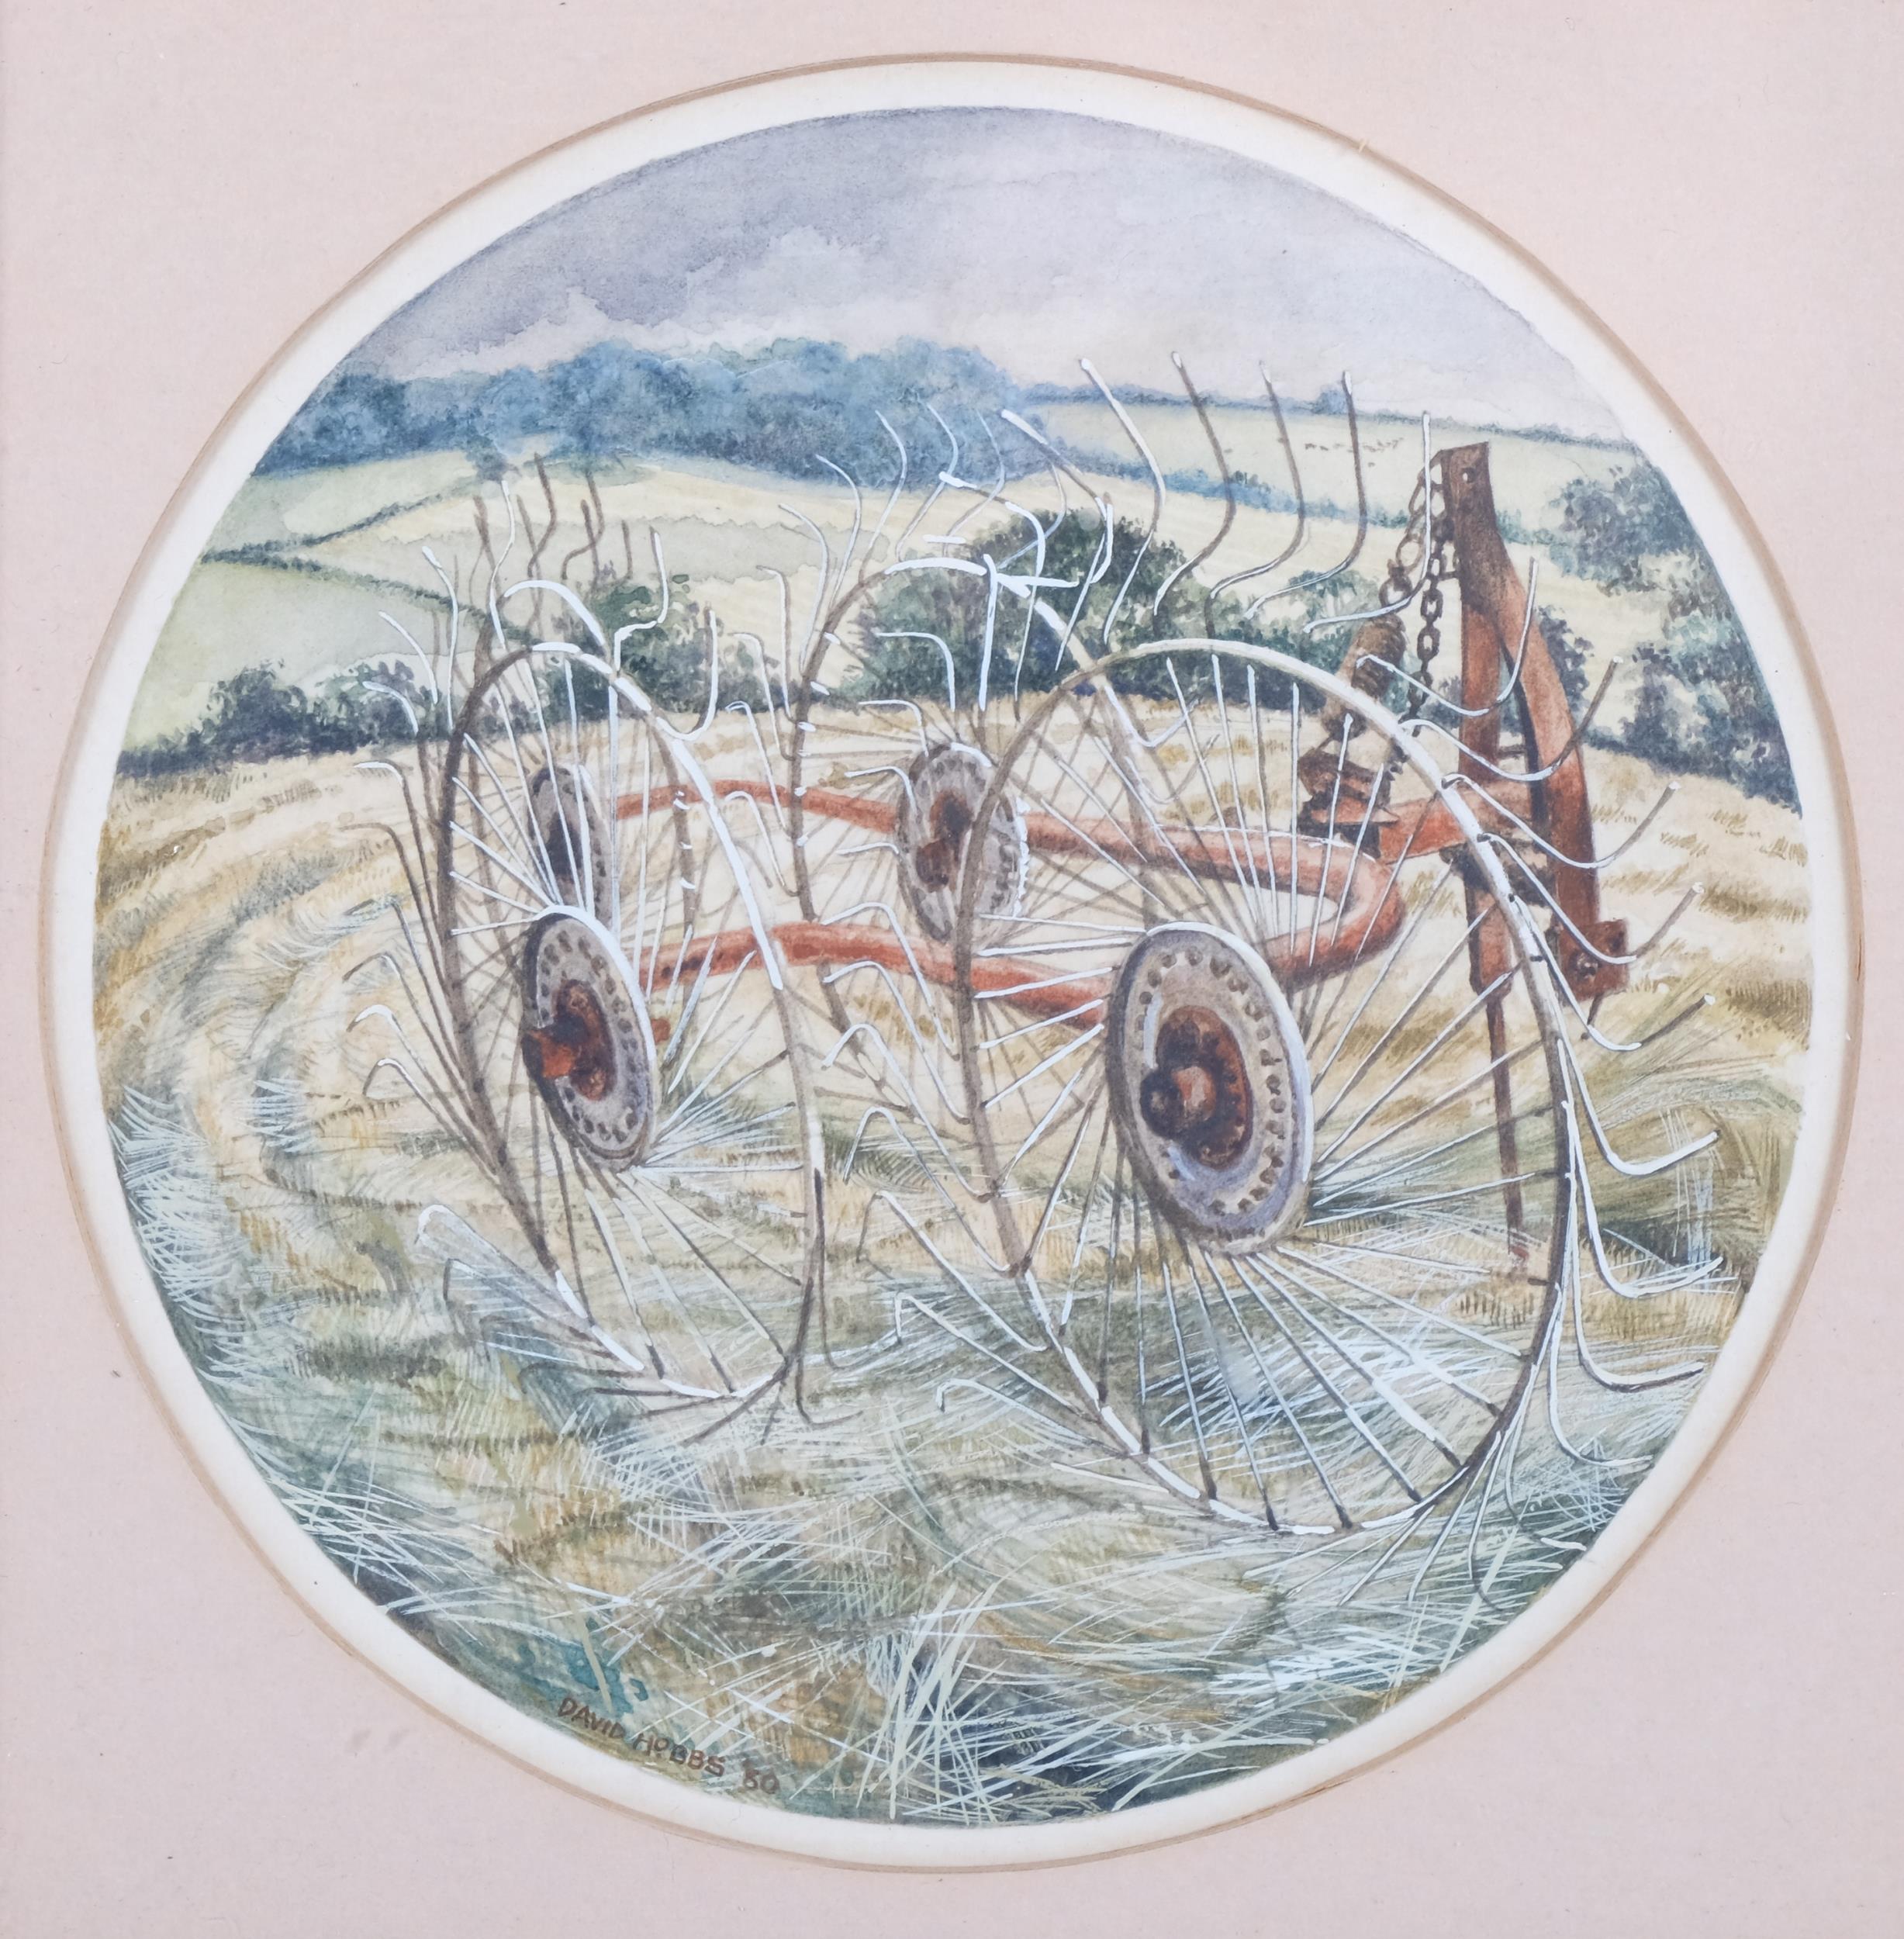 David Hobbs, farm machinery, circular watercolour, signed and dated 1980, image 11cm across,